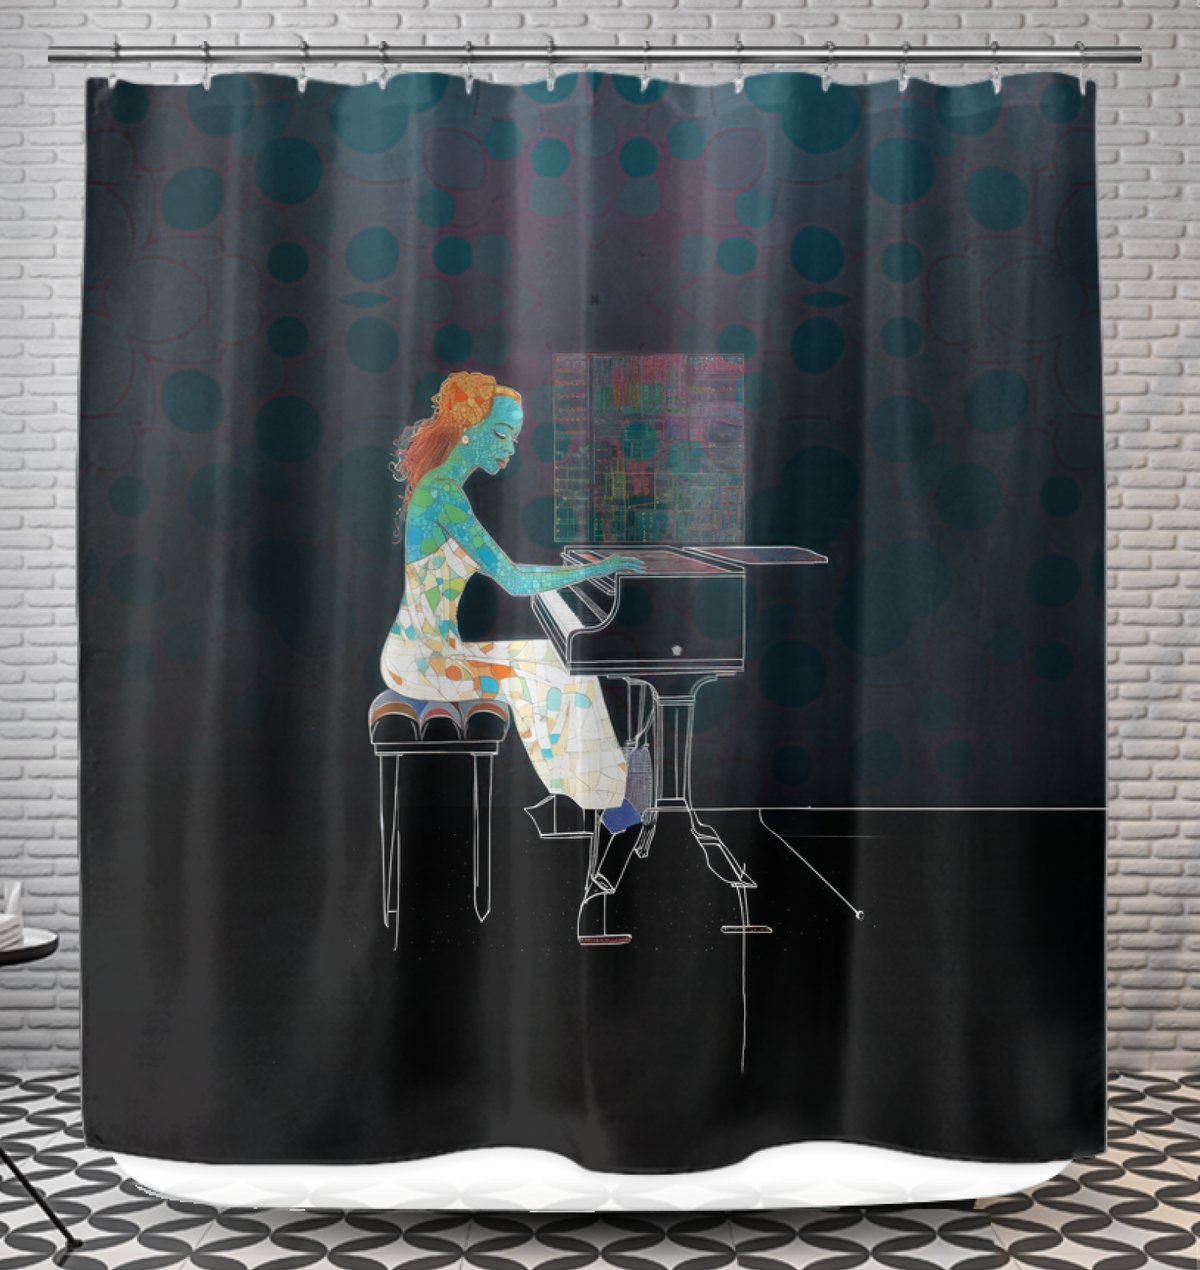 A close-up view of the Iris Illumination Shower Curtain showcasing its colorful design.